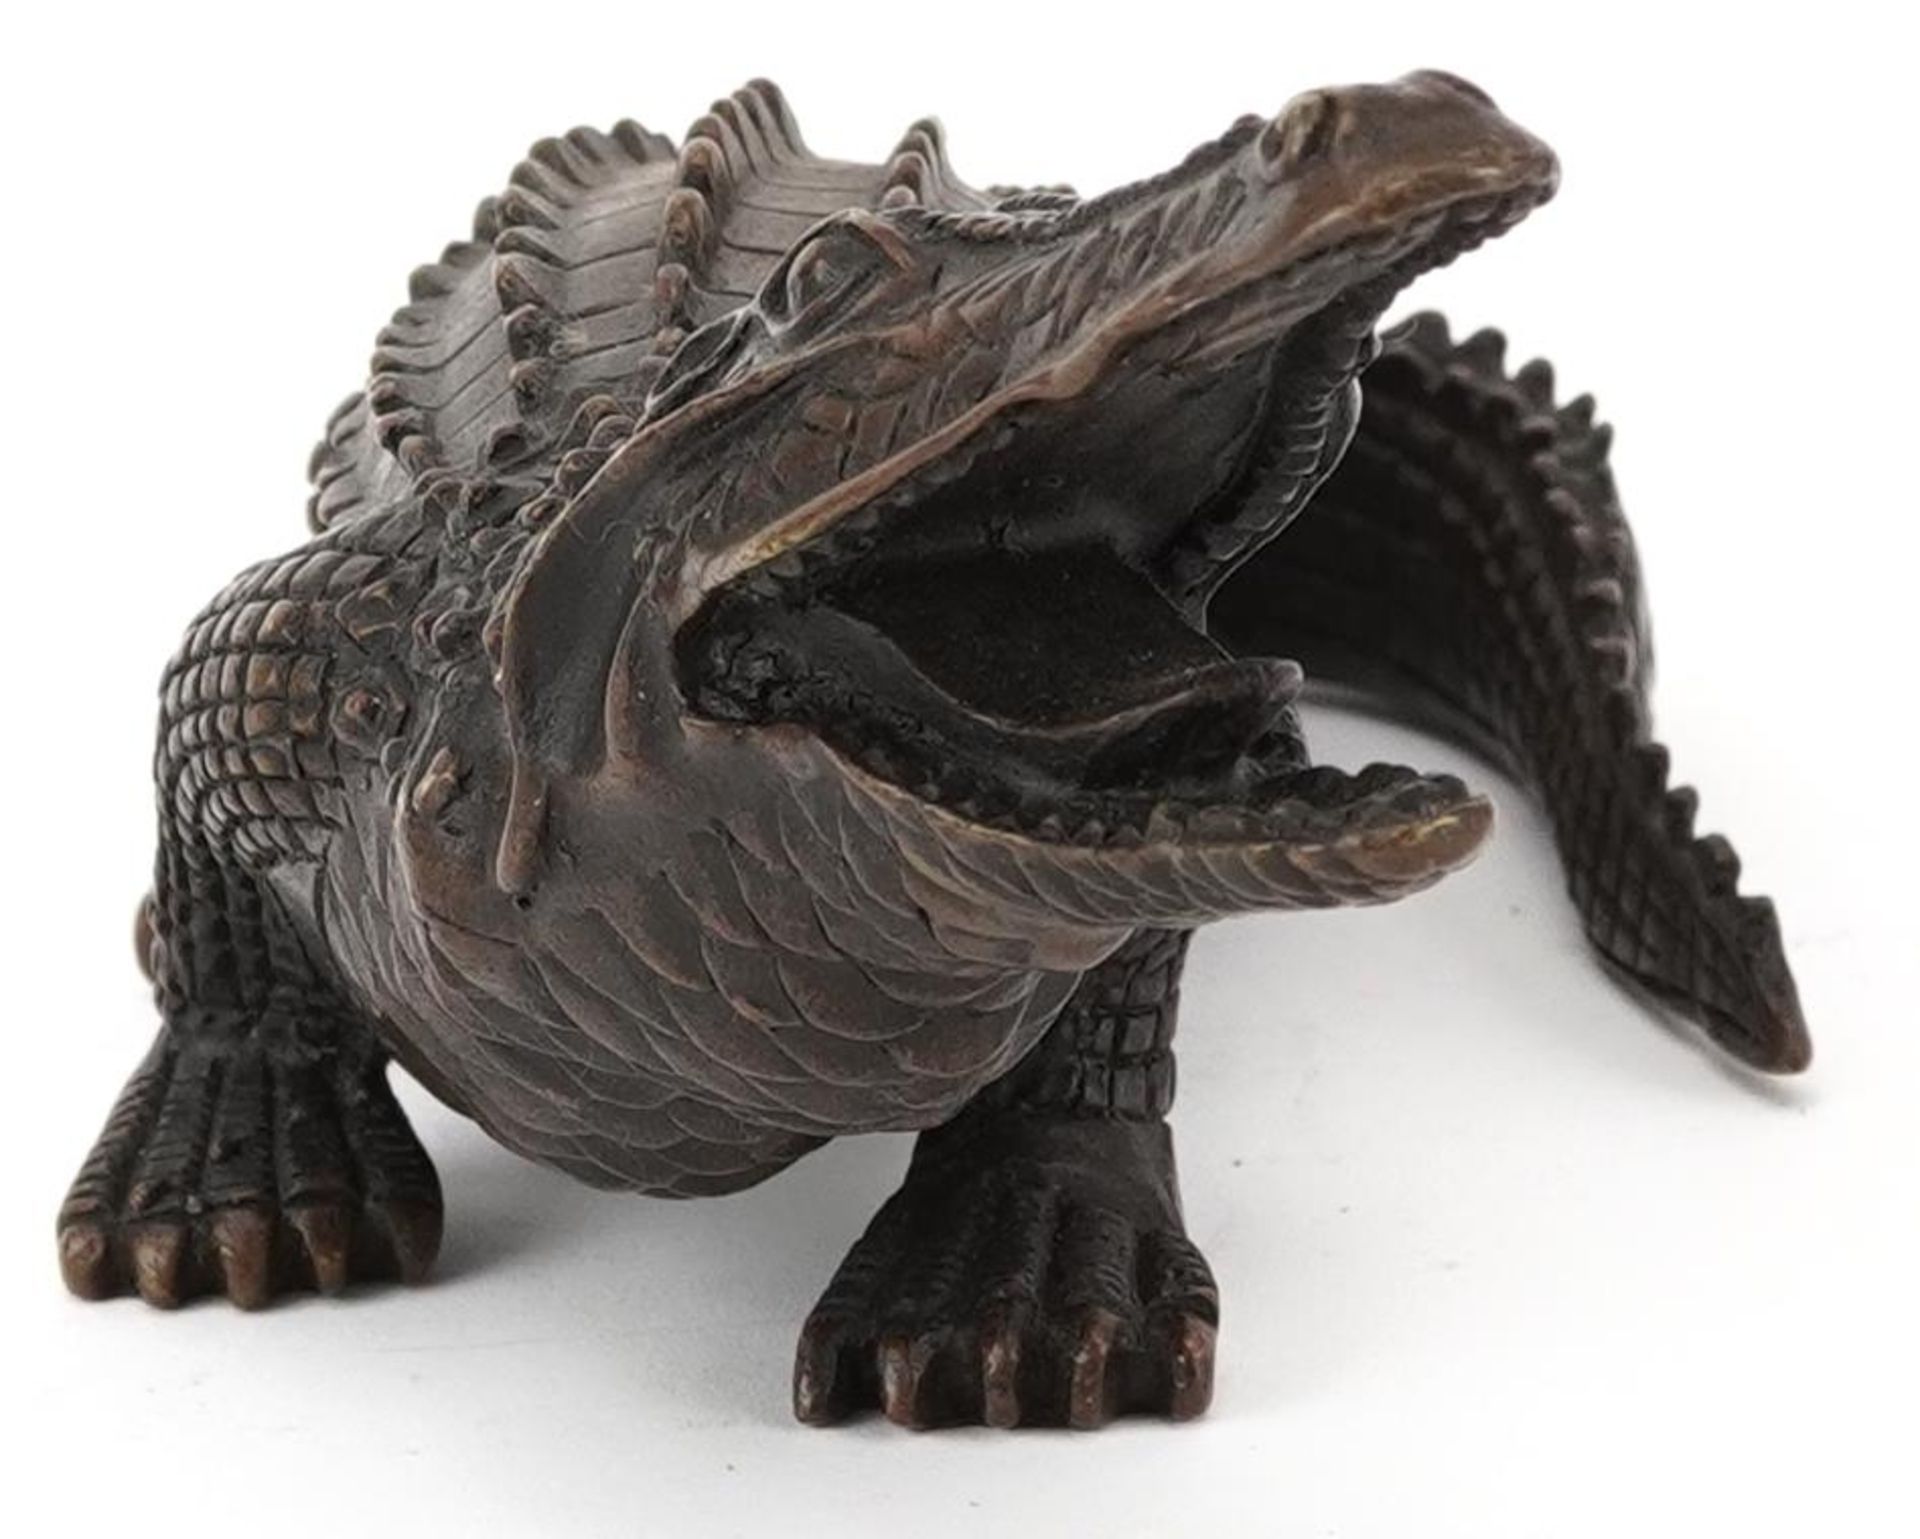 Patinated bronze study of a crocodile, 24cm in length - Image 5 of 7